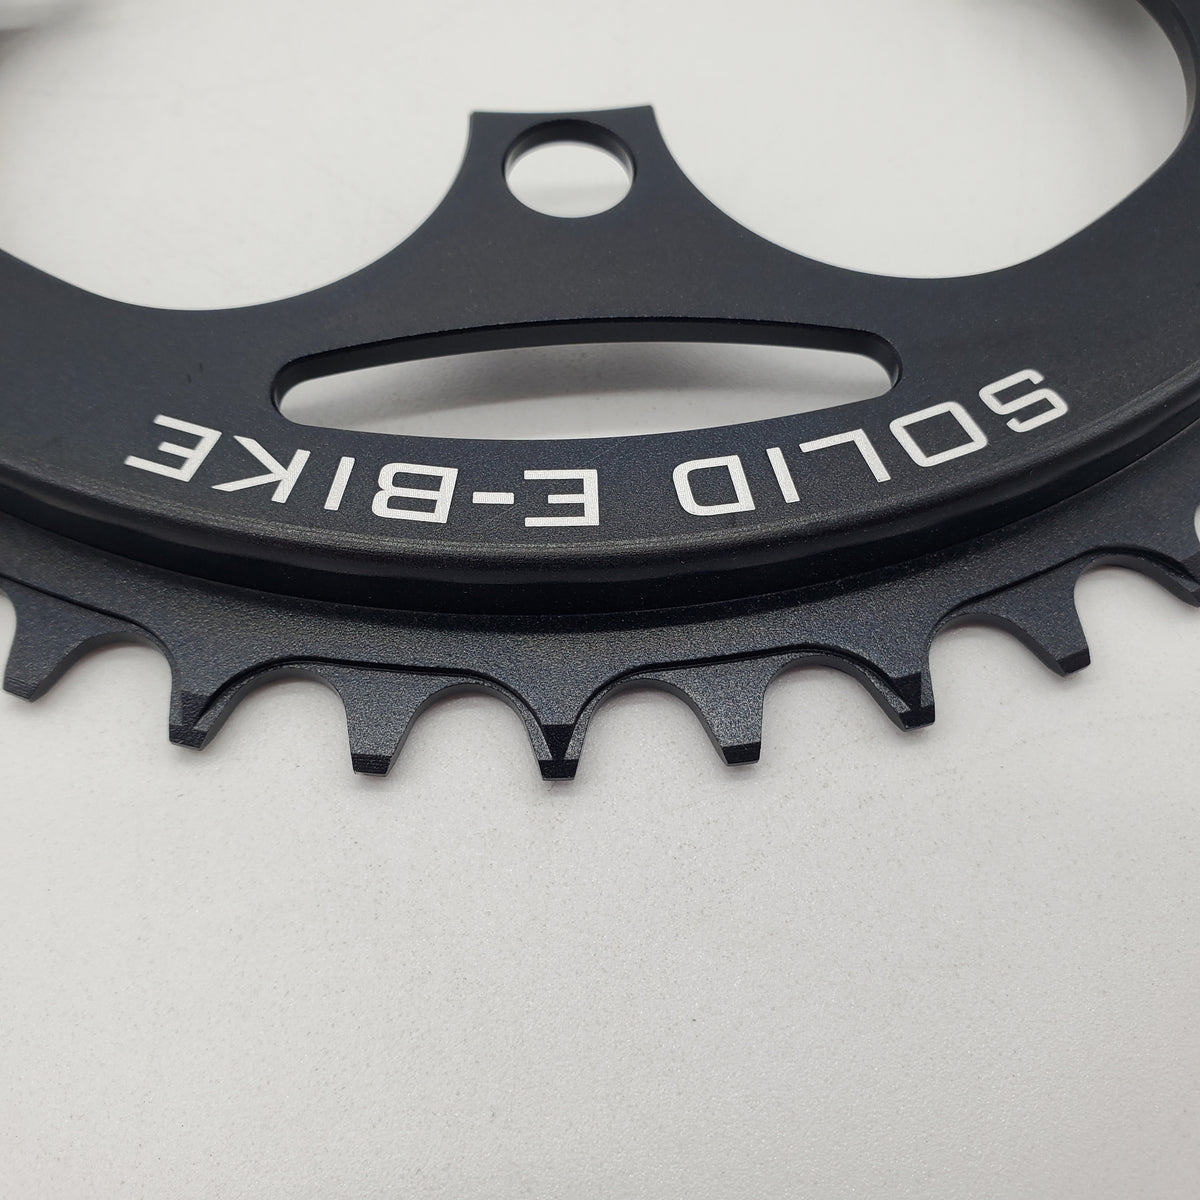 50T Chainring for TSDZ2 - Narrow Wide - 10mm Offset - 110 BCD (Solid E-bike)